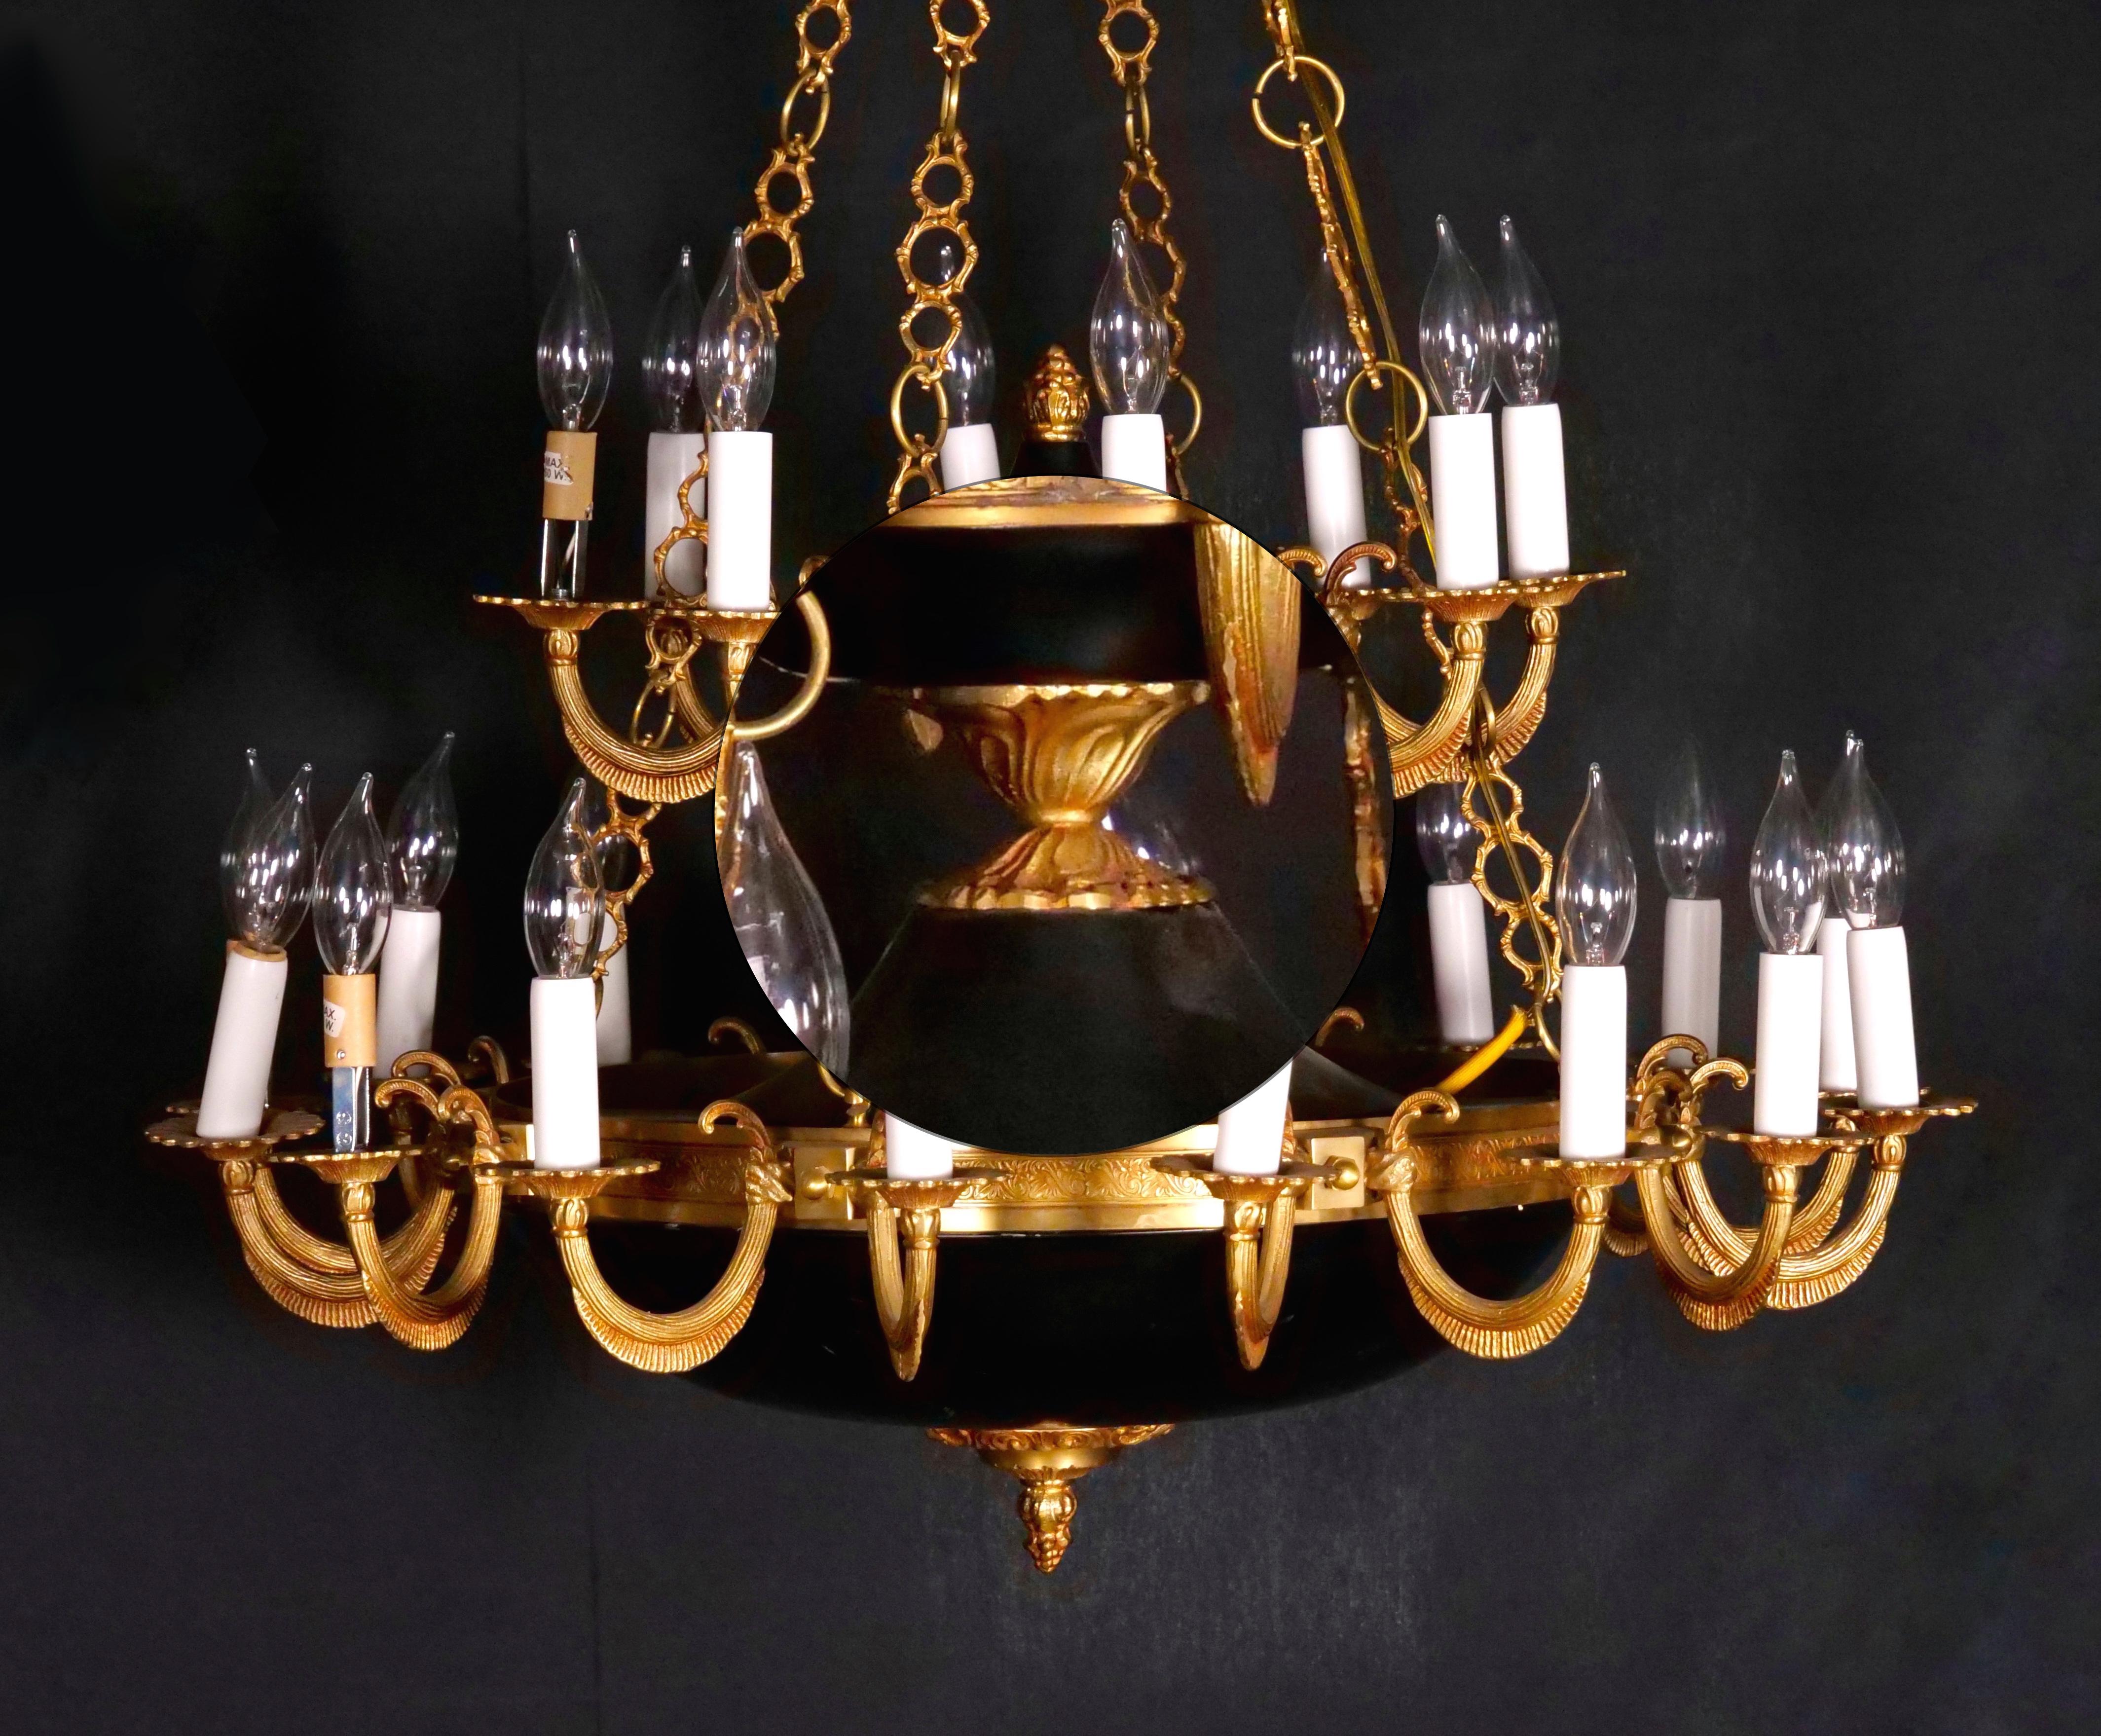 Mid-19th Century 19th Century French Empire Style 24-Light Gilt Bronze / Patinated Chandelier For Sale